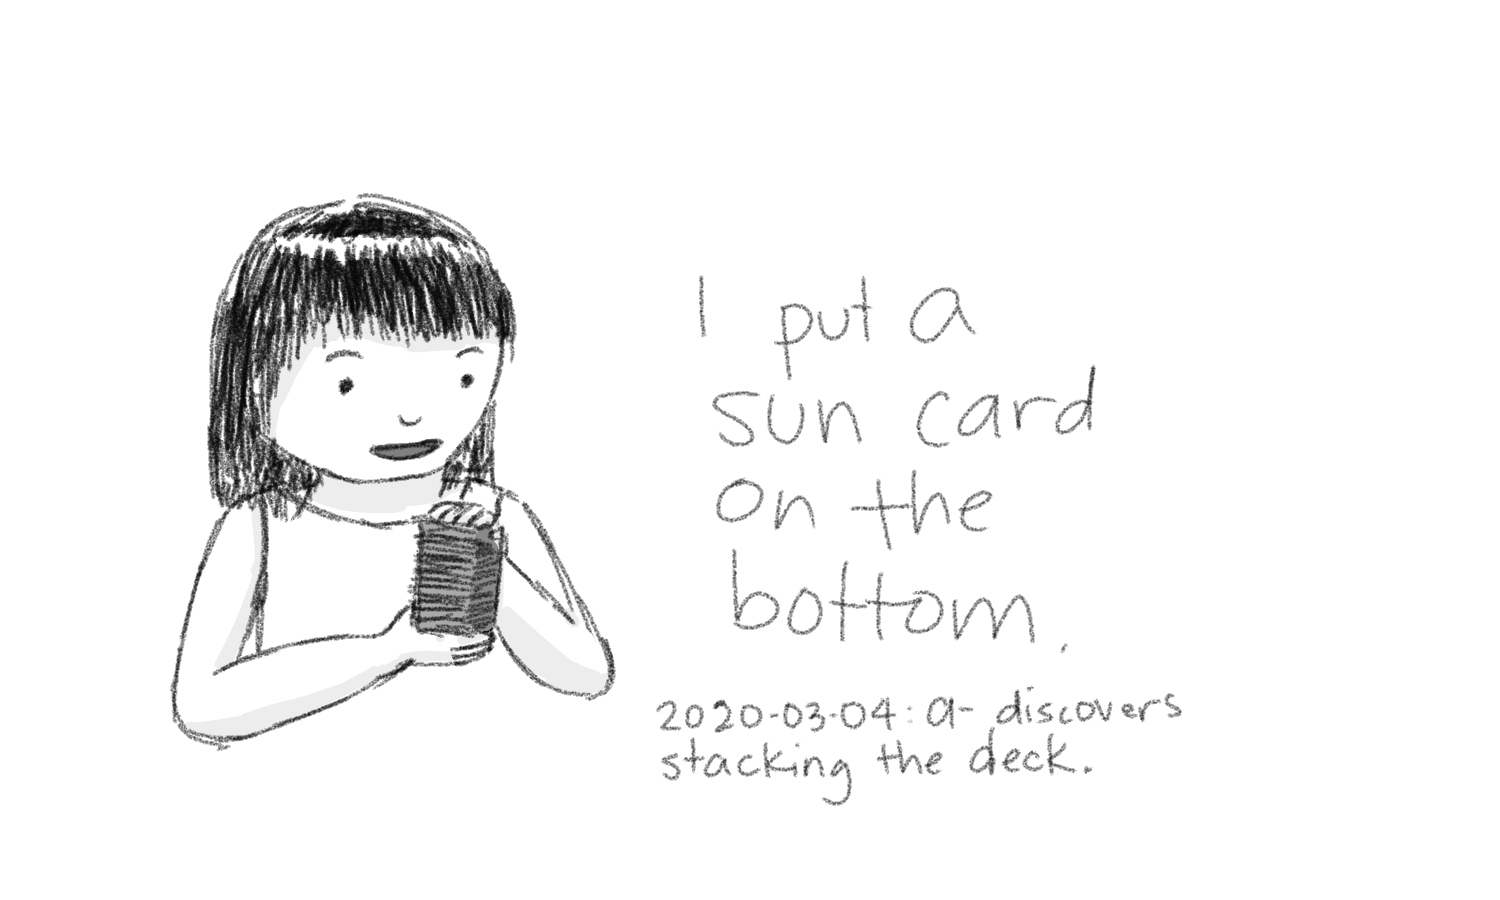 2020-03-04 I put a sun card on the bottom. A- discovers stacking the deck. #moment #sketch.png